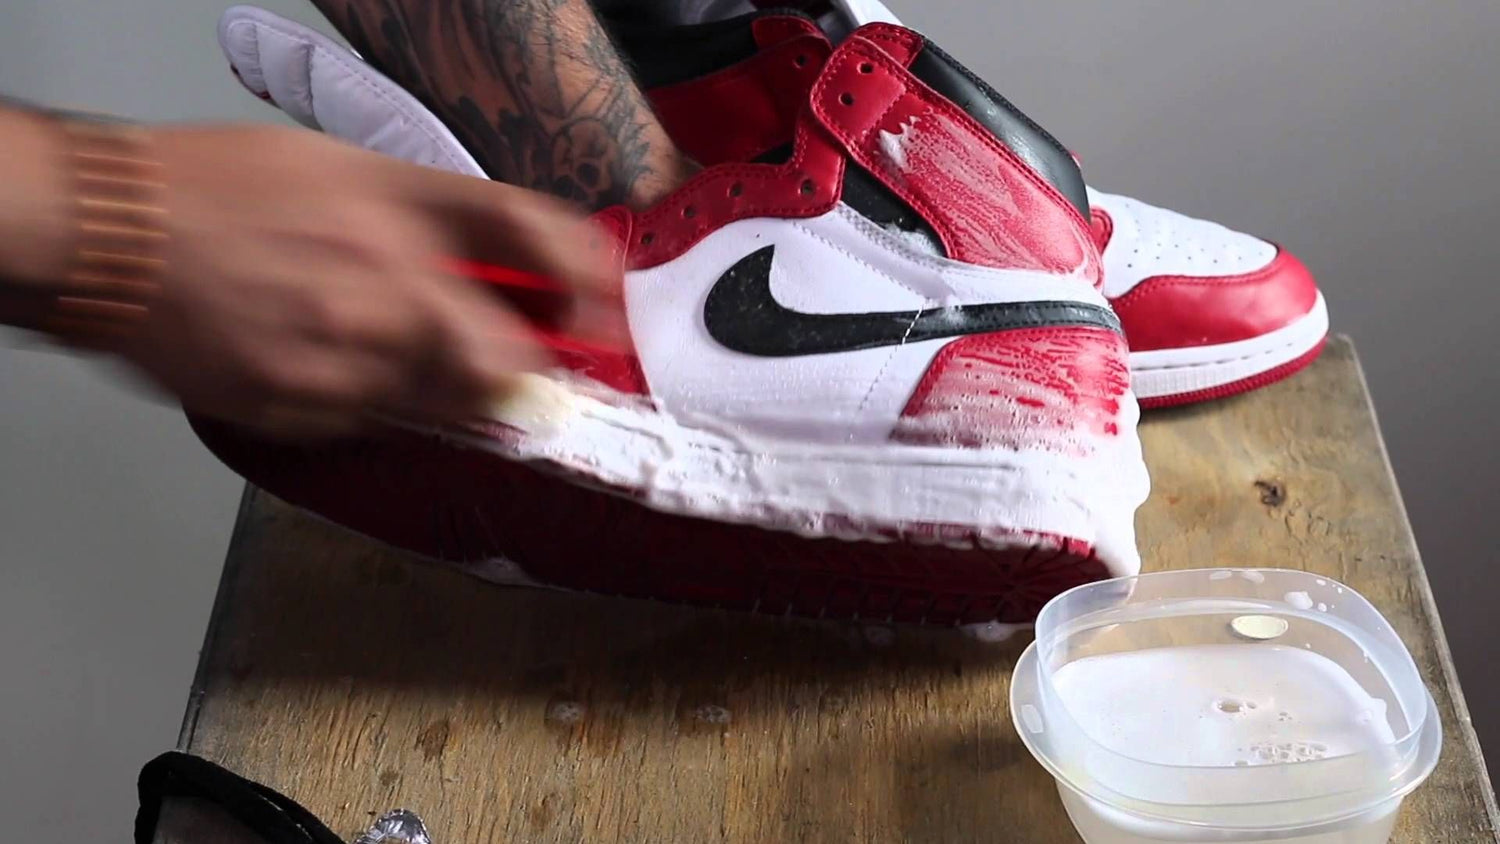 The benefits of cleaning your sneakers